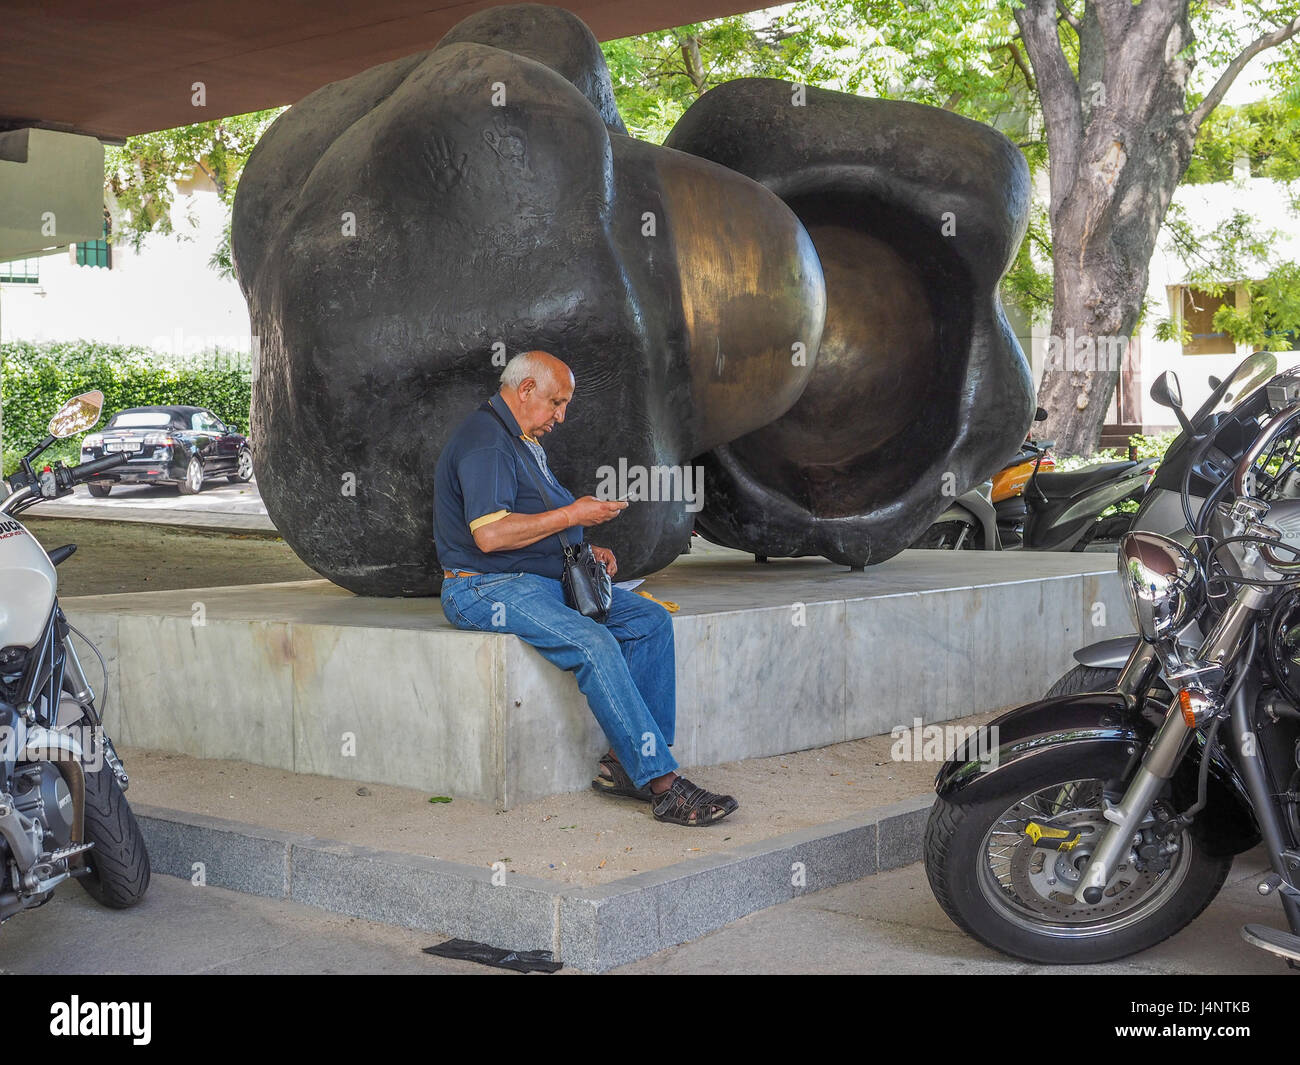 a view of Unidades sculpture by Pablo Serrano in the open air garden park museum Museo de escultura al aire libre Madrid man person sitting looking Stock Photo